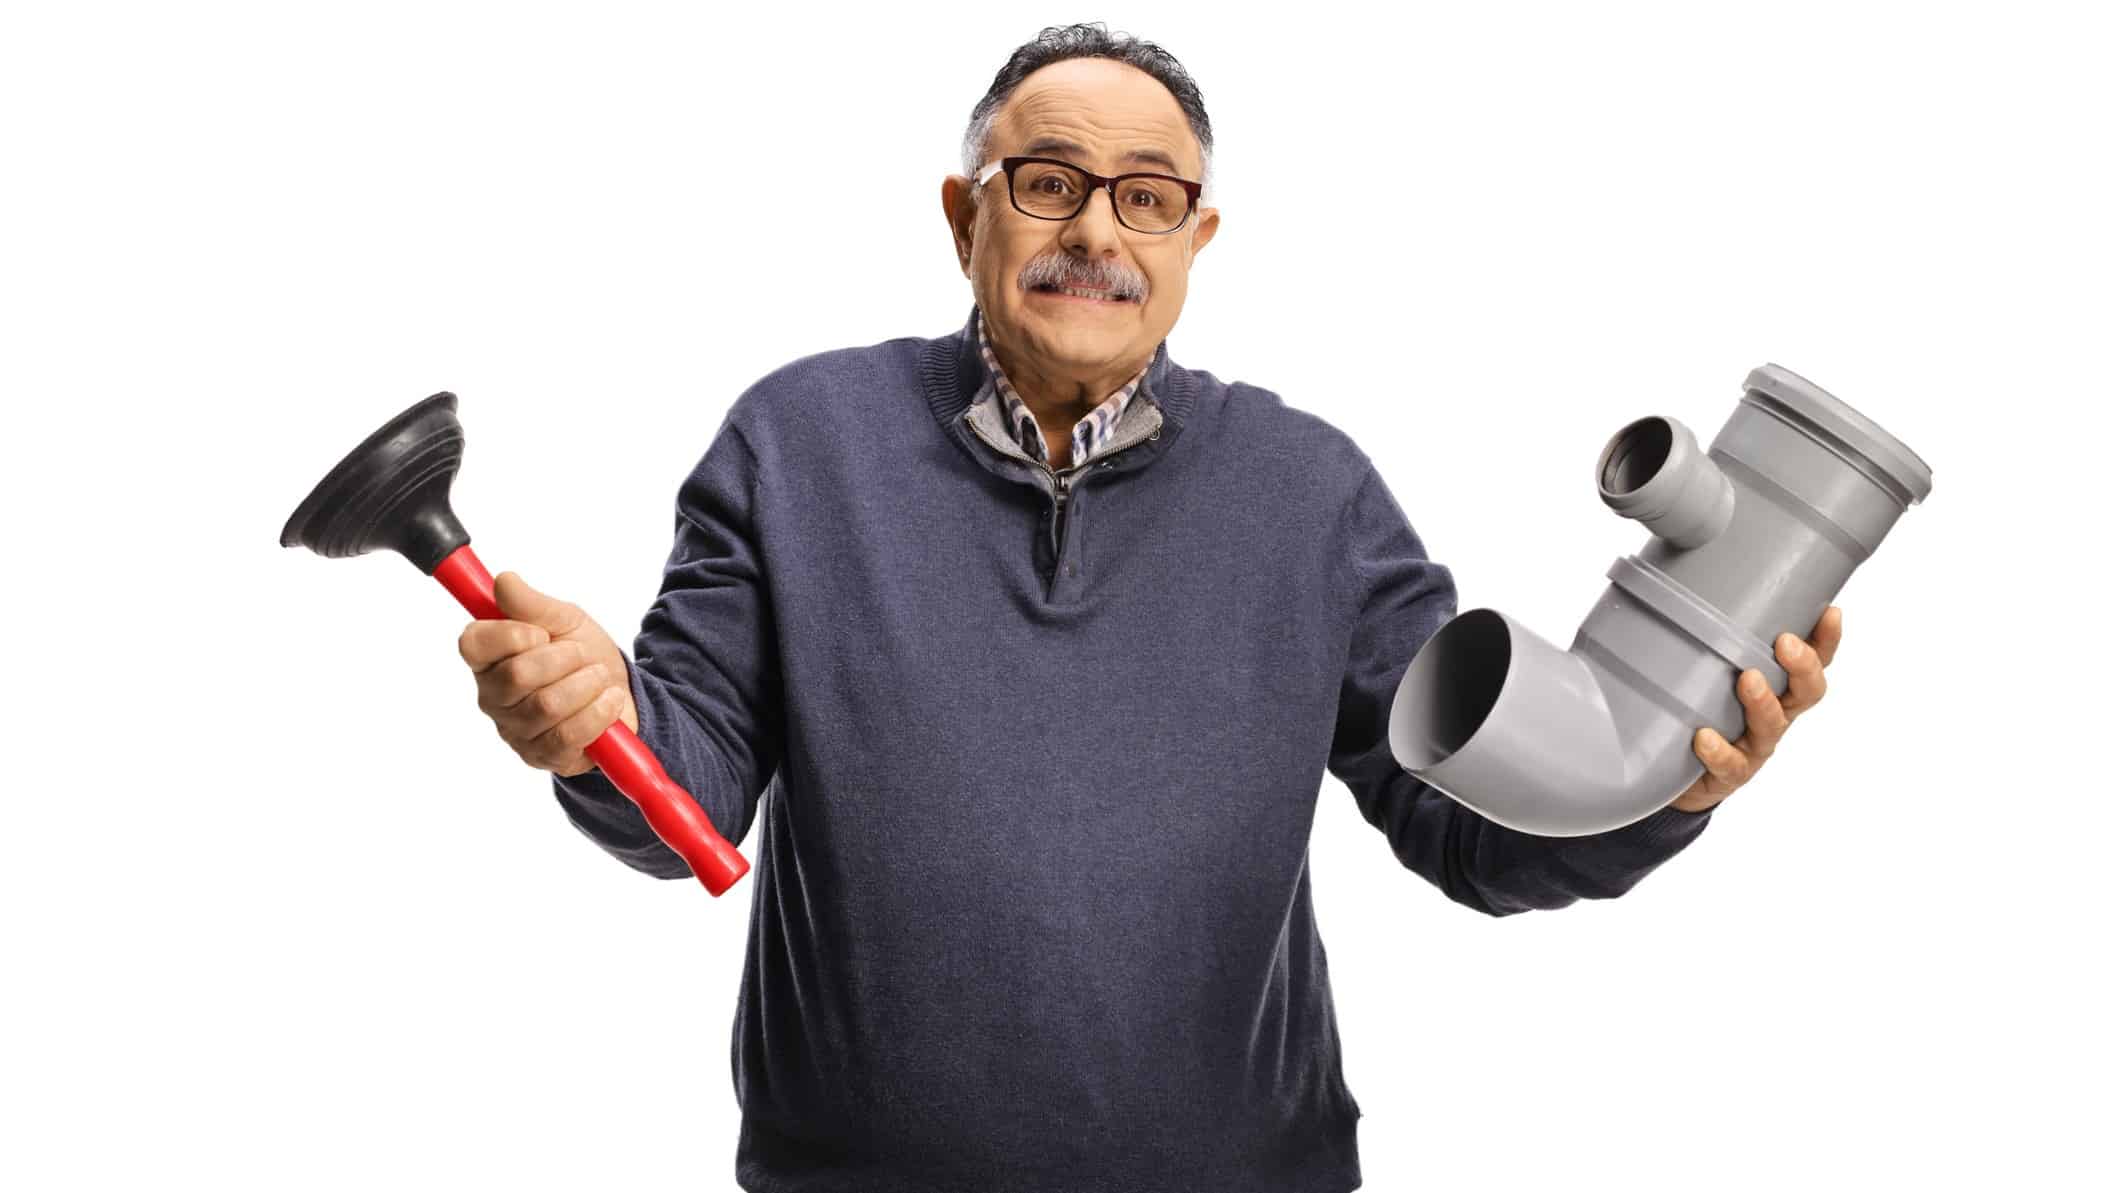 A middle aged man with a moustache and wearing casual clothes holds a plumbing plunger in one hand a a piece of toilet pipe in the other with an exasperated look on his face.